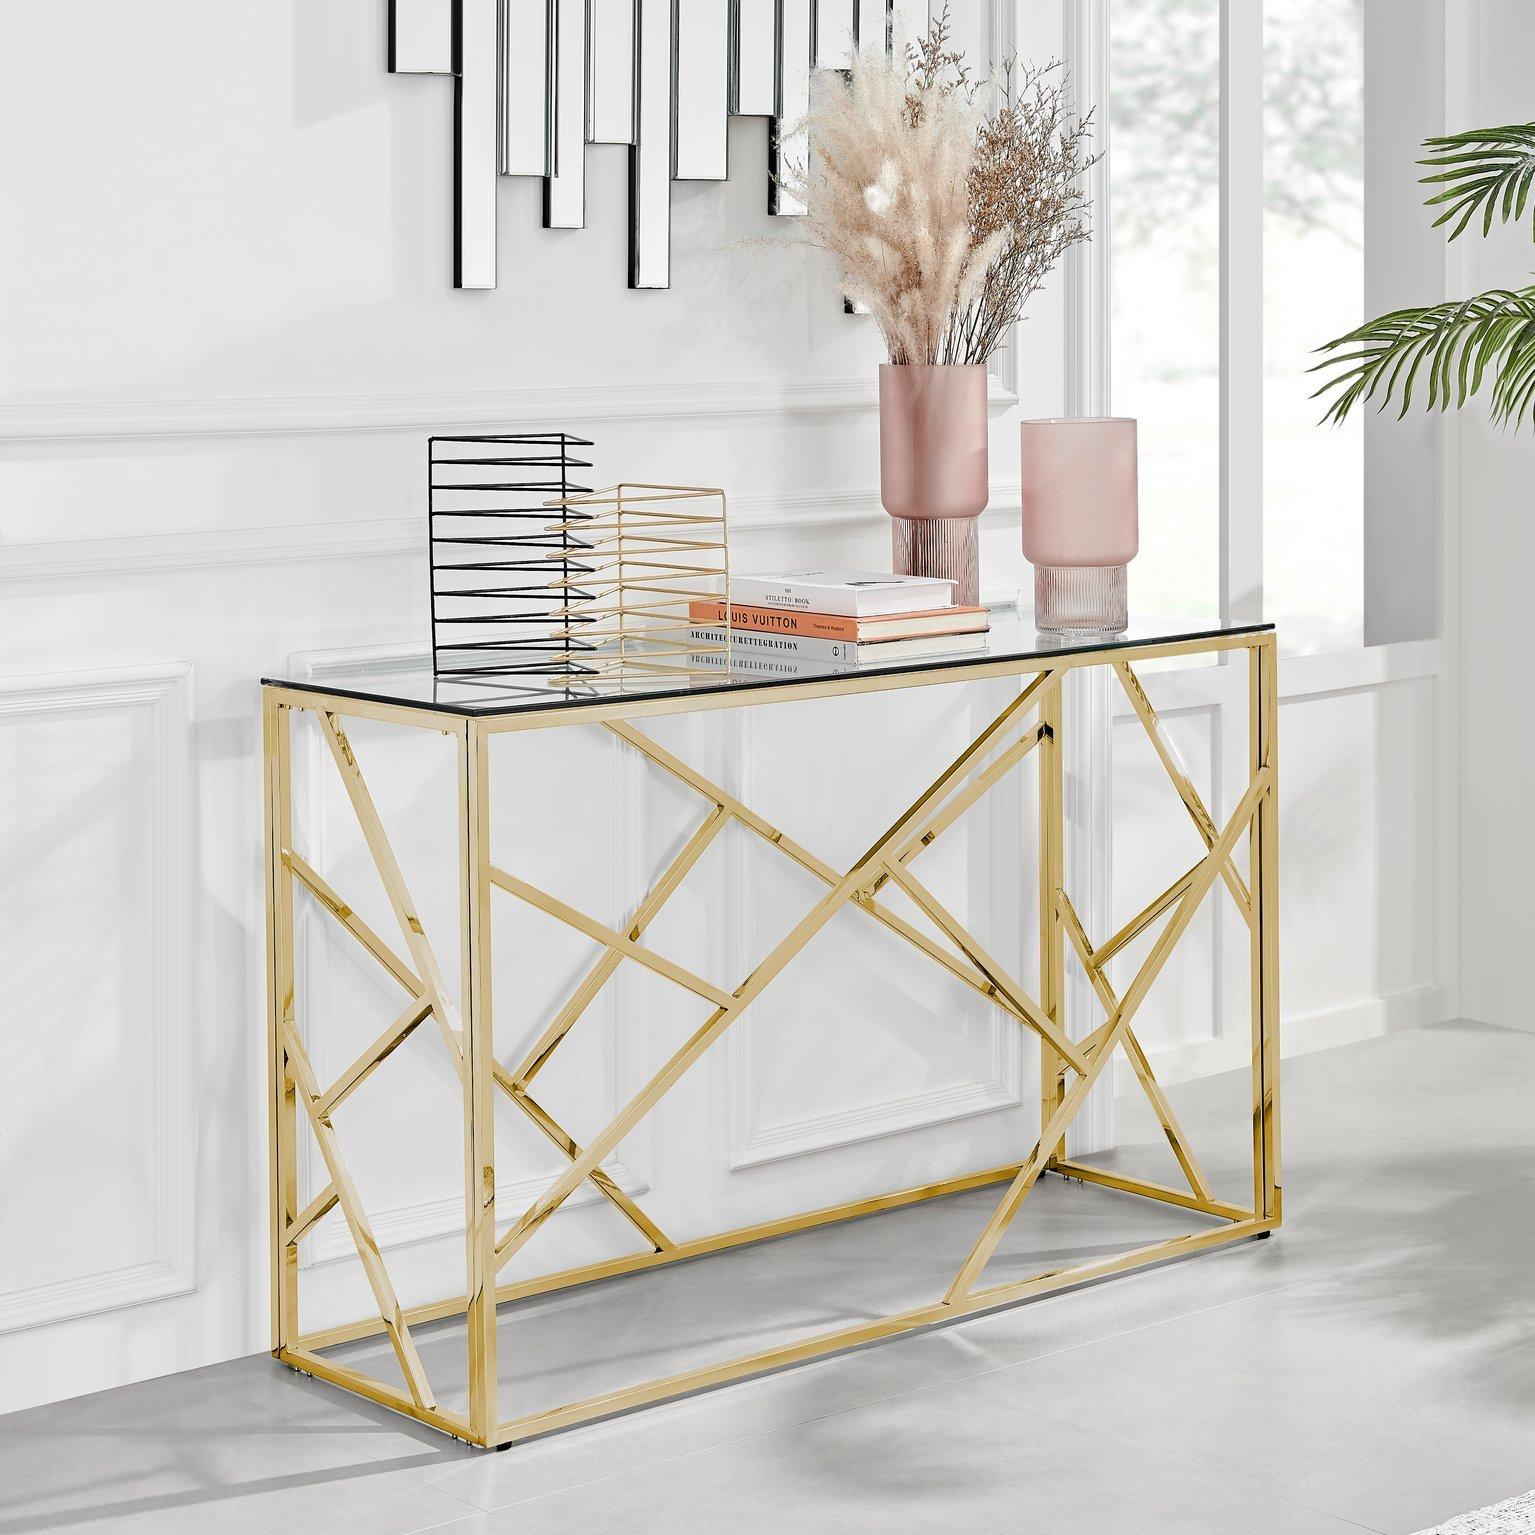 Amalfi Console Table - Rectangular Clear Glass & Chromed Metal Table - Abstract Pattern - Sleek, Chi